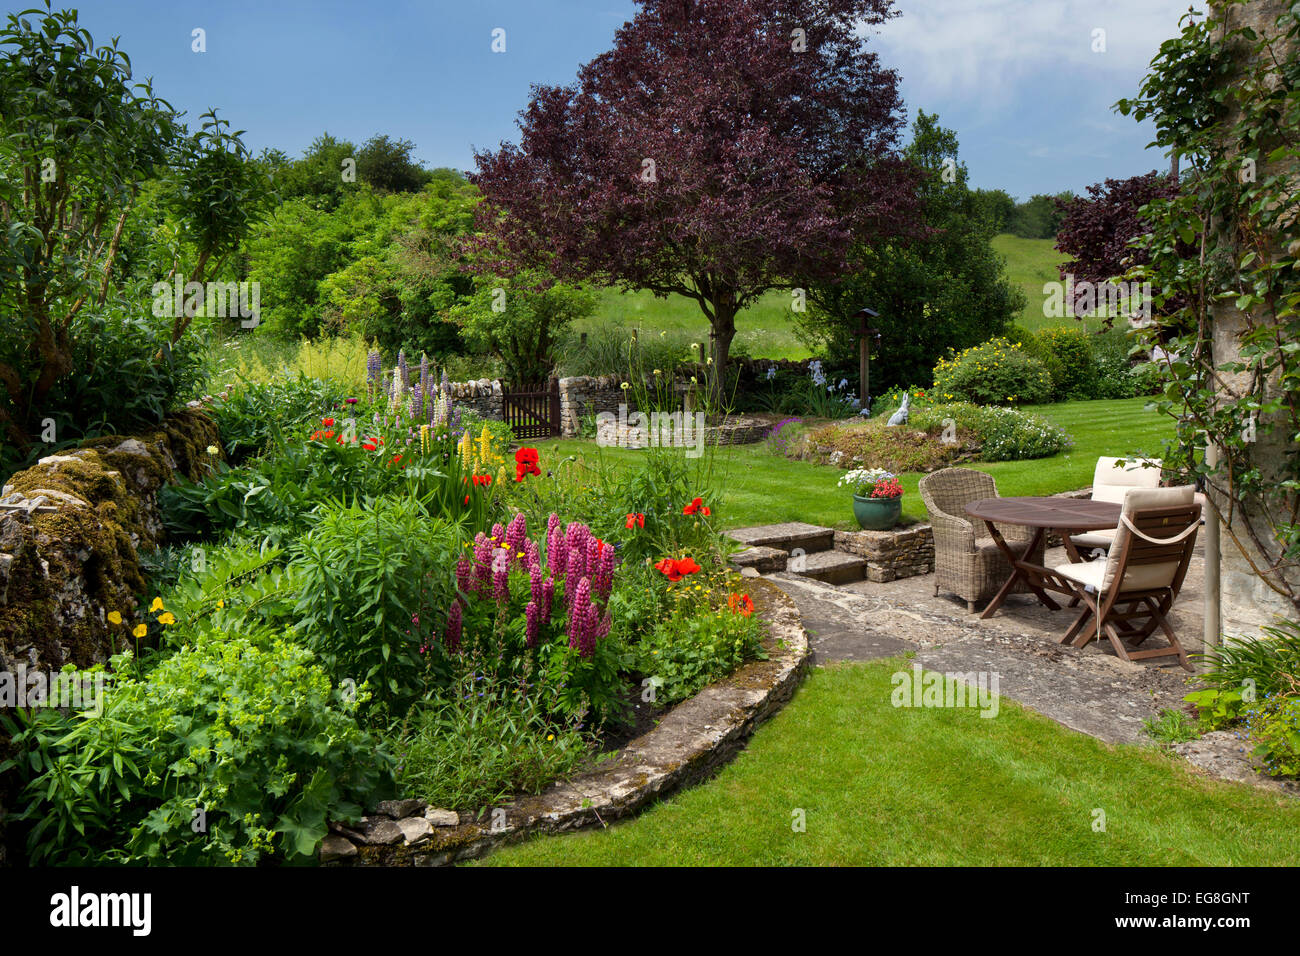 English garden in the summer with seating lawn and flower boarders Stock Photo